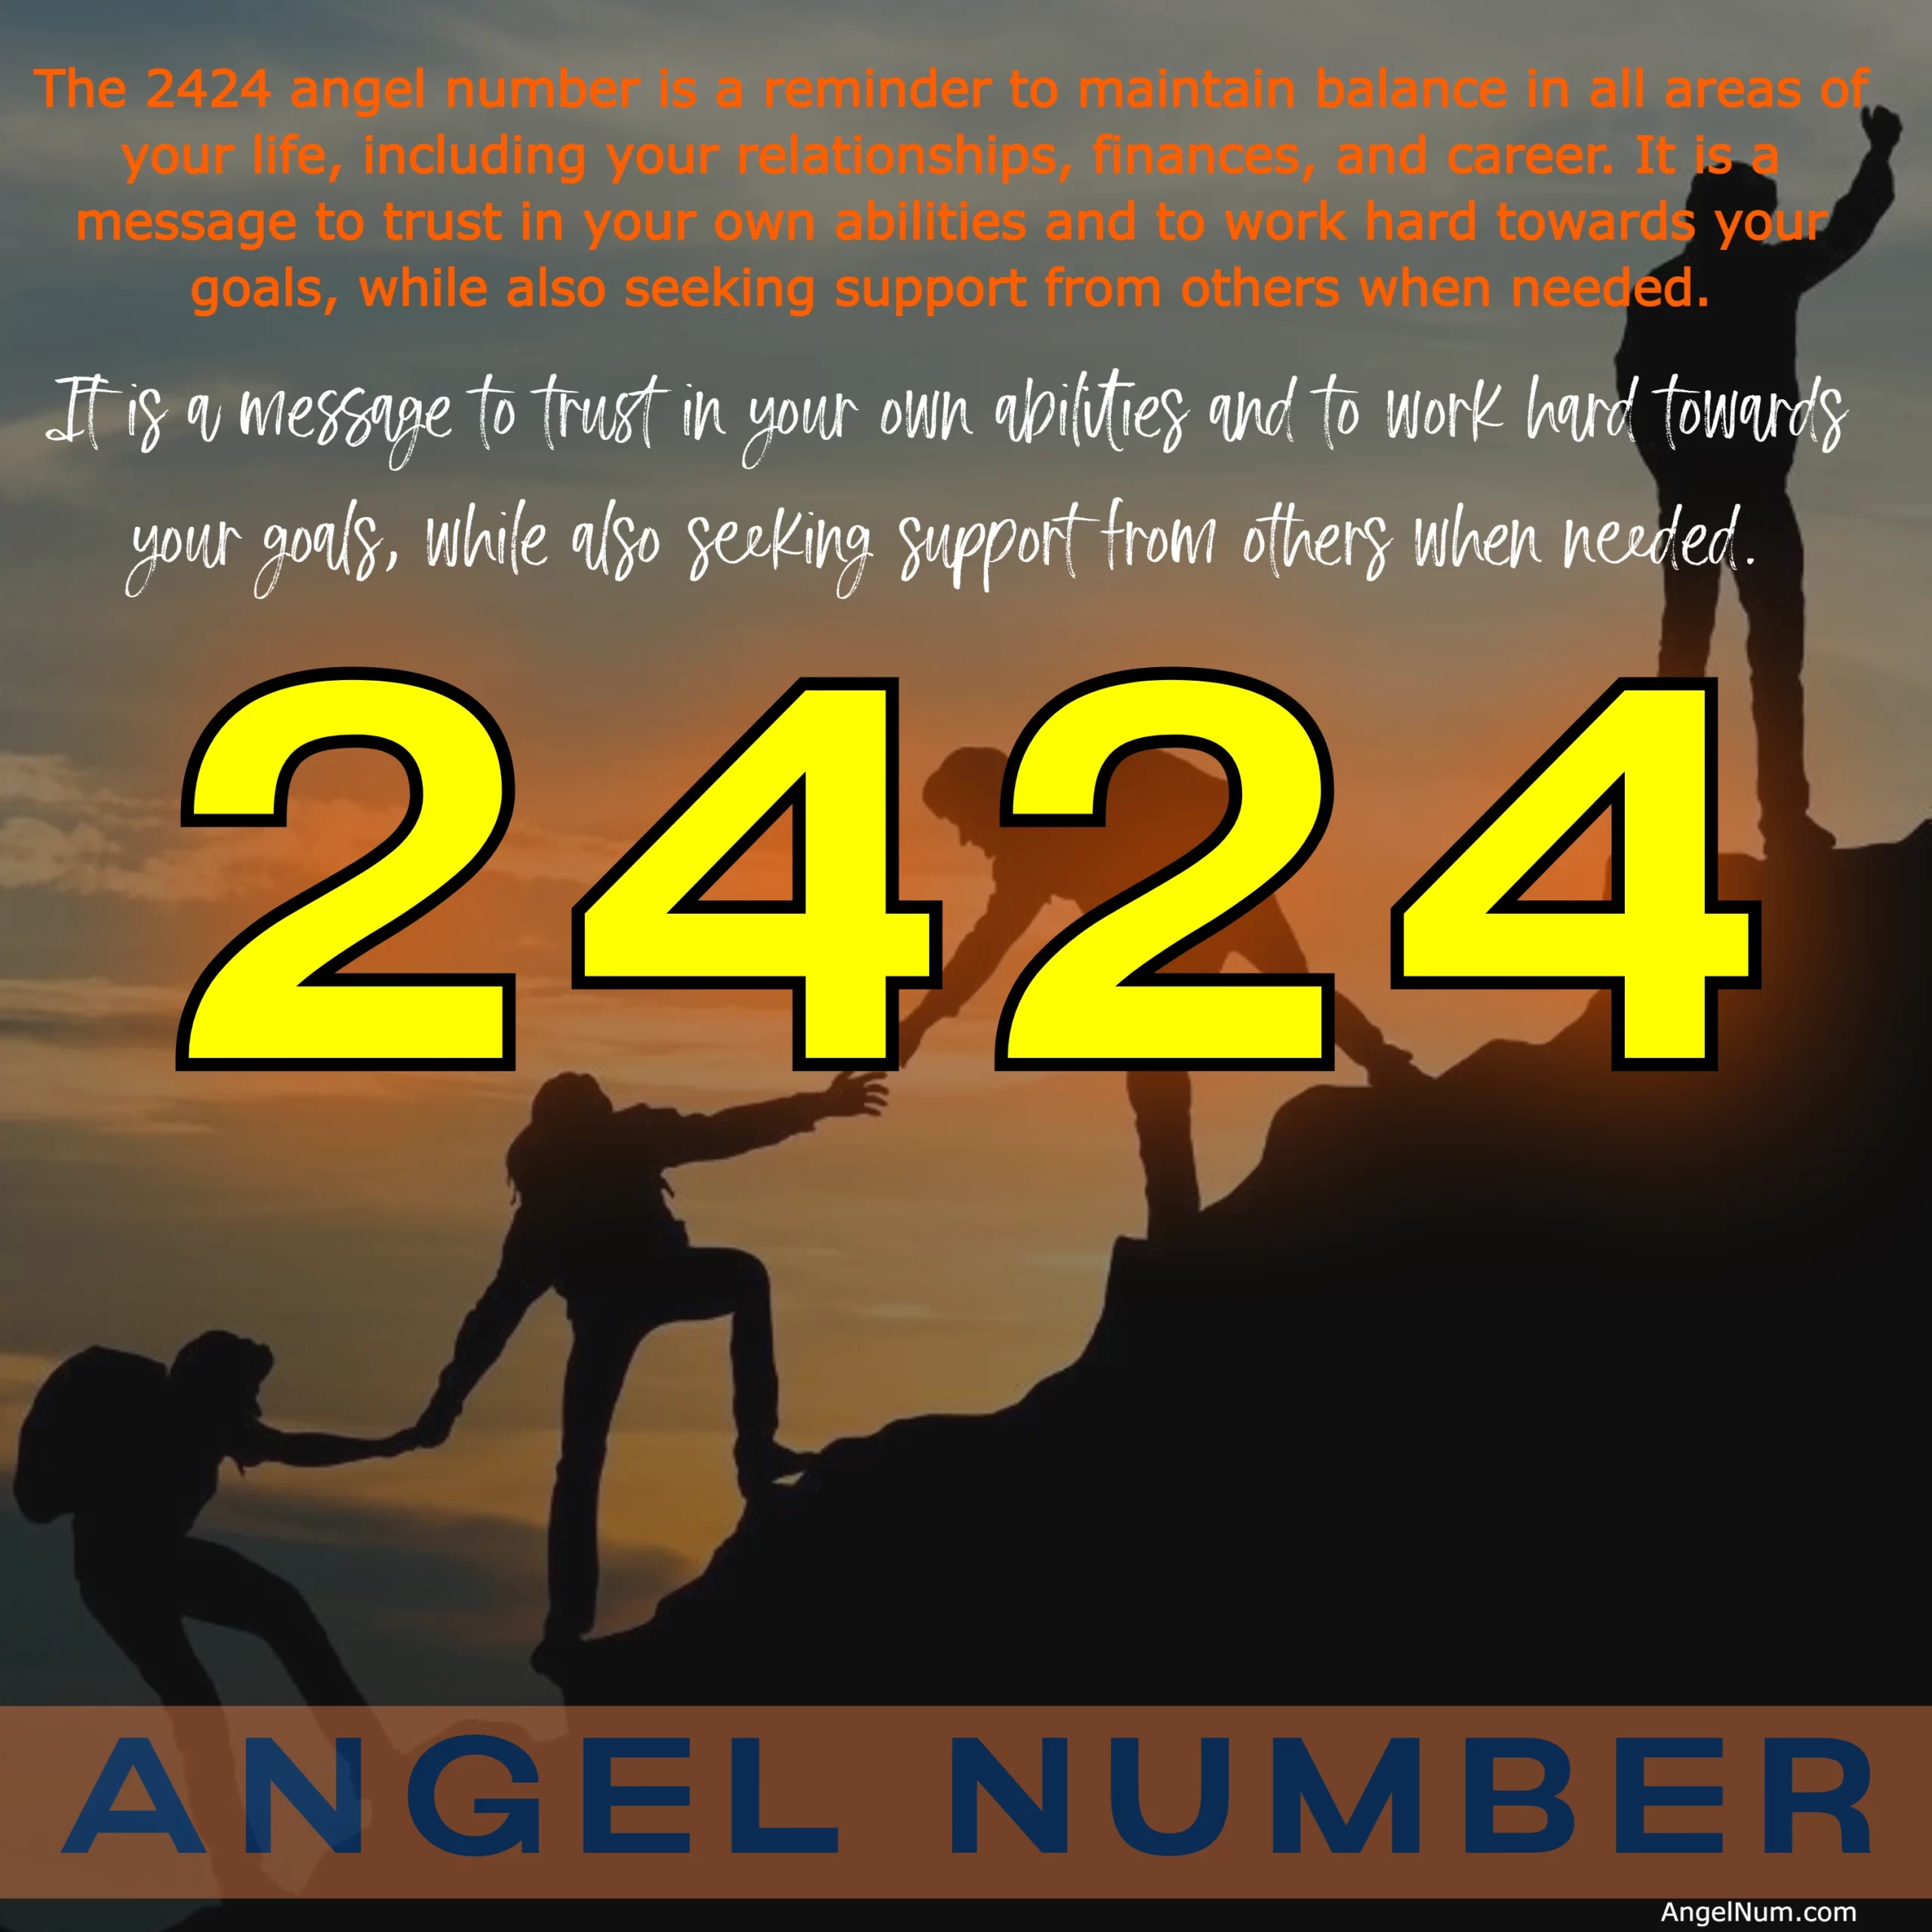 Angel Number 2424: The Importance of Balance and Stability